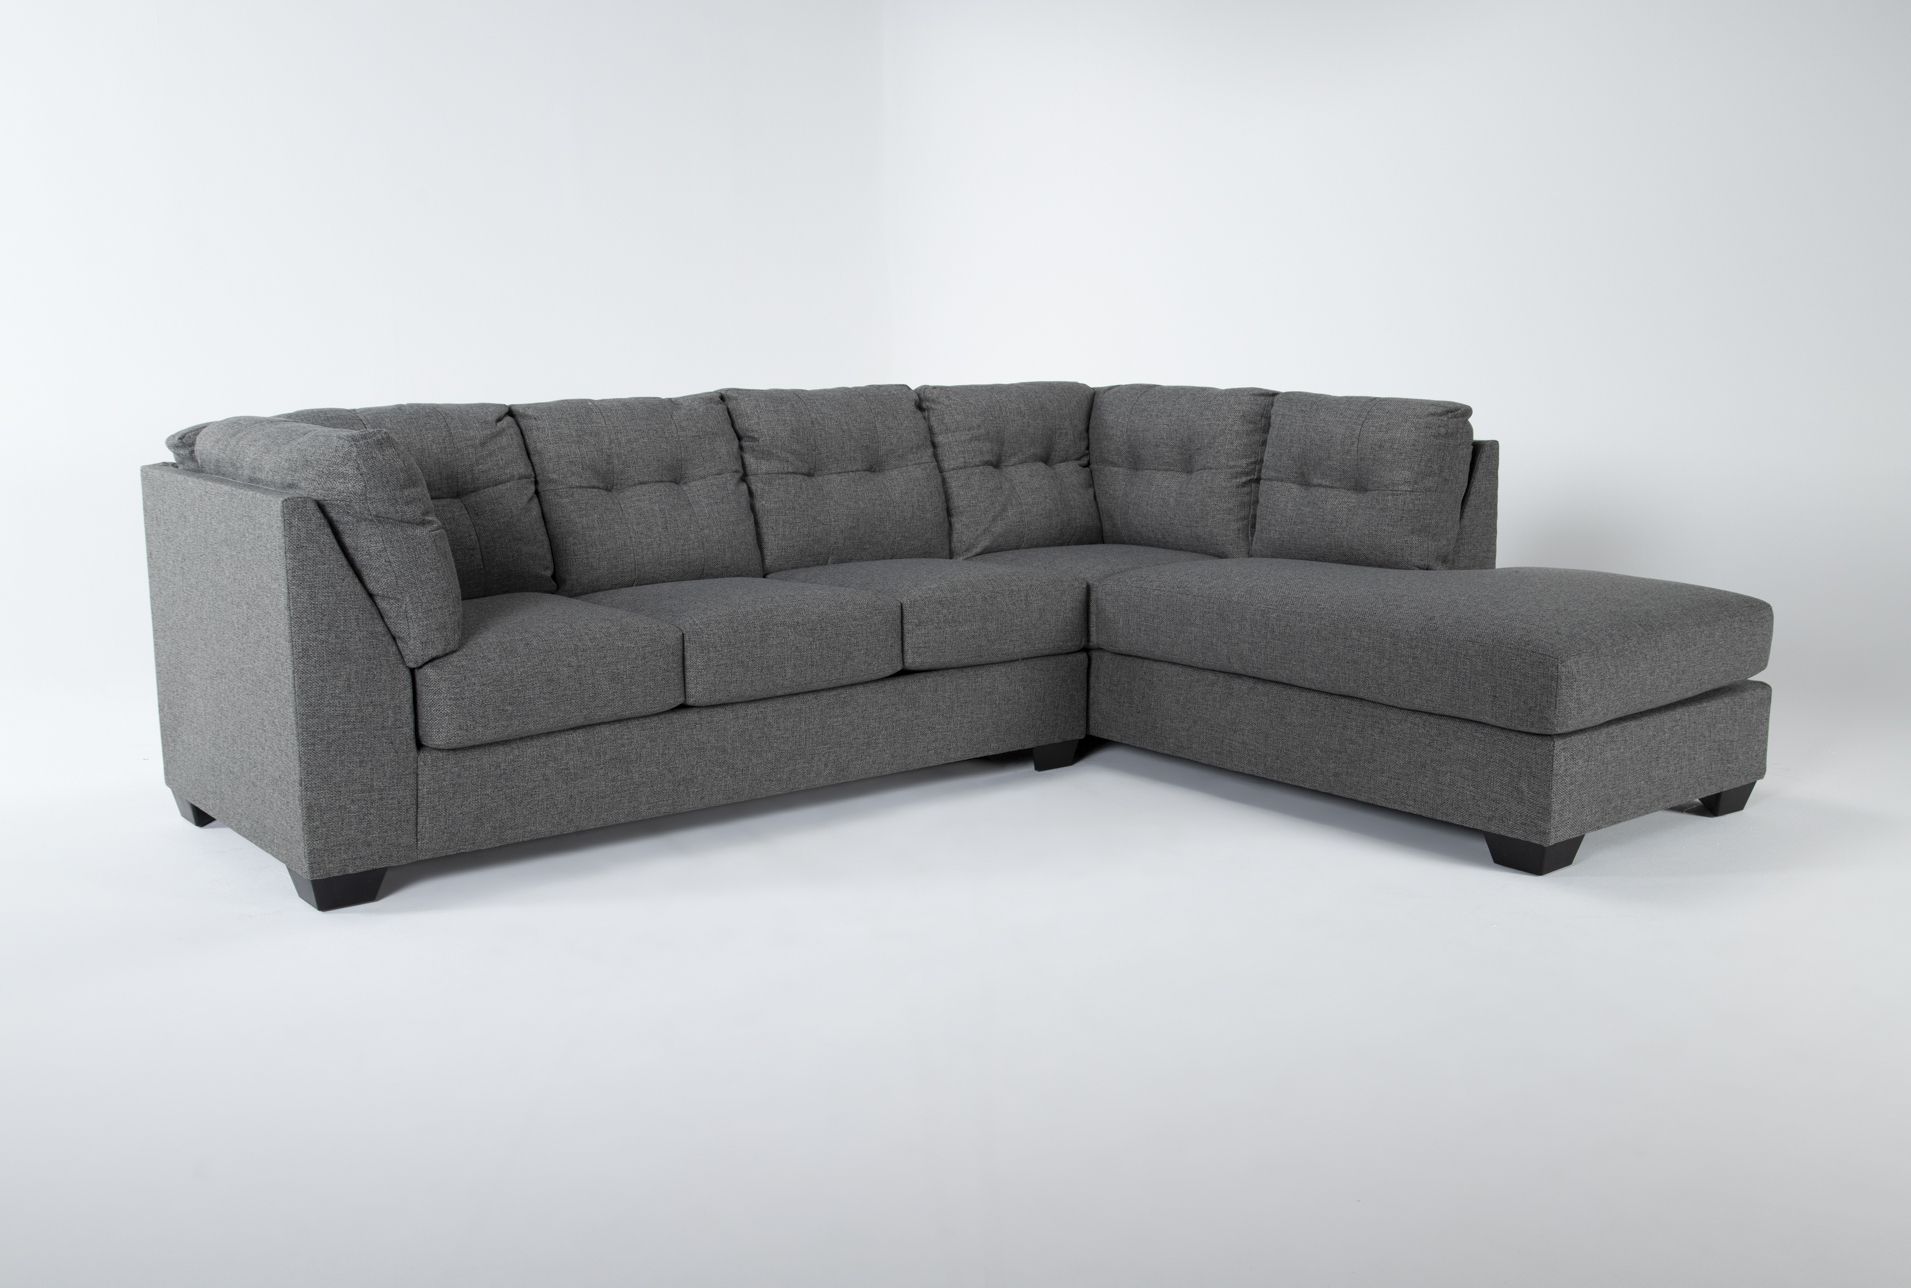 Arrowmask Charcoal 2 Piece 115" Full Sleeper Sectional With Left Arm Regarding Popular Left Or Right Facing Sleeper Sectionals (View 4 of 15)